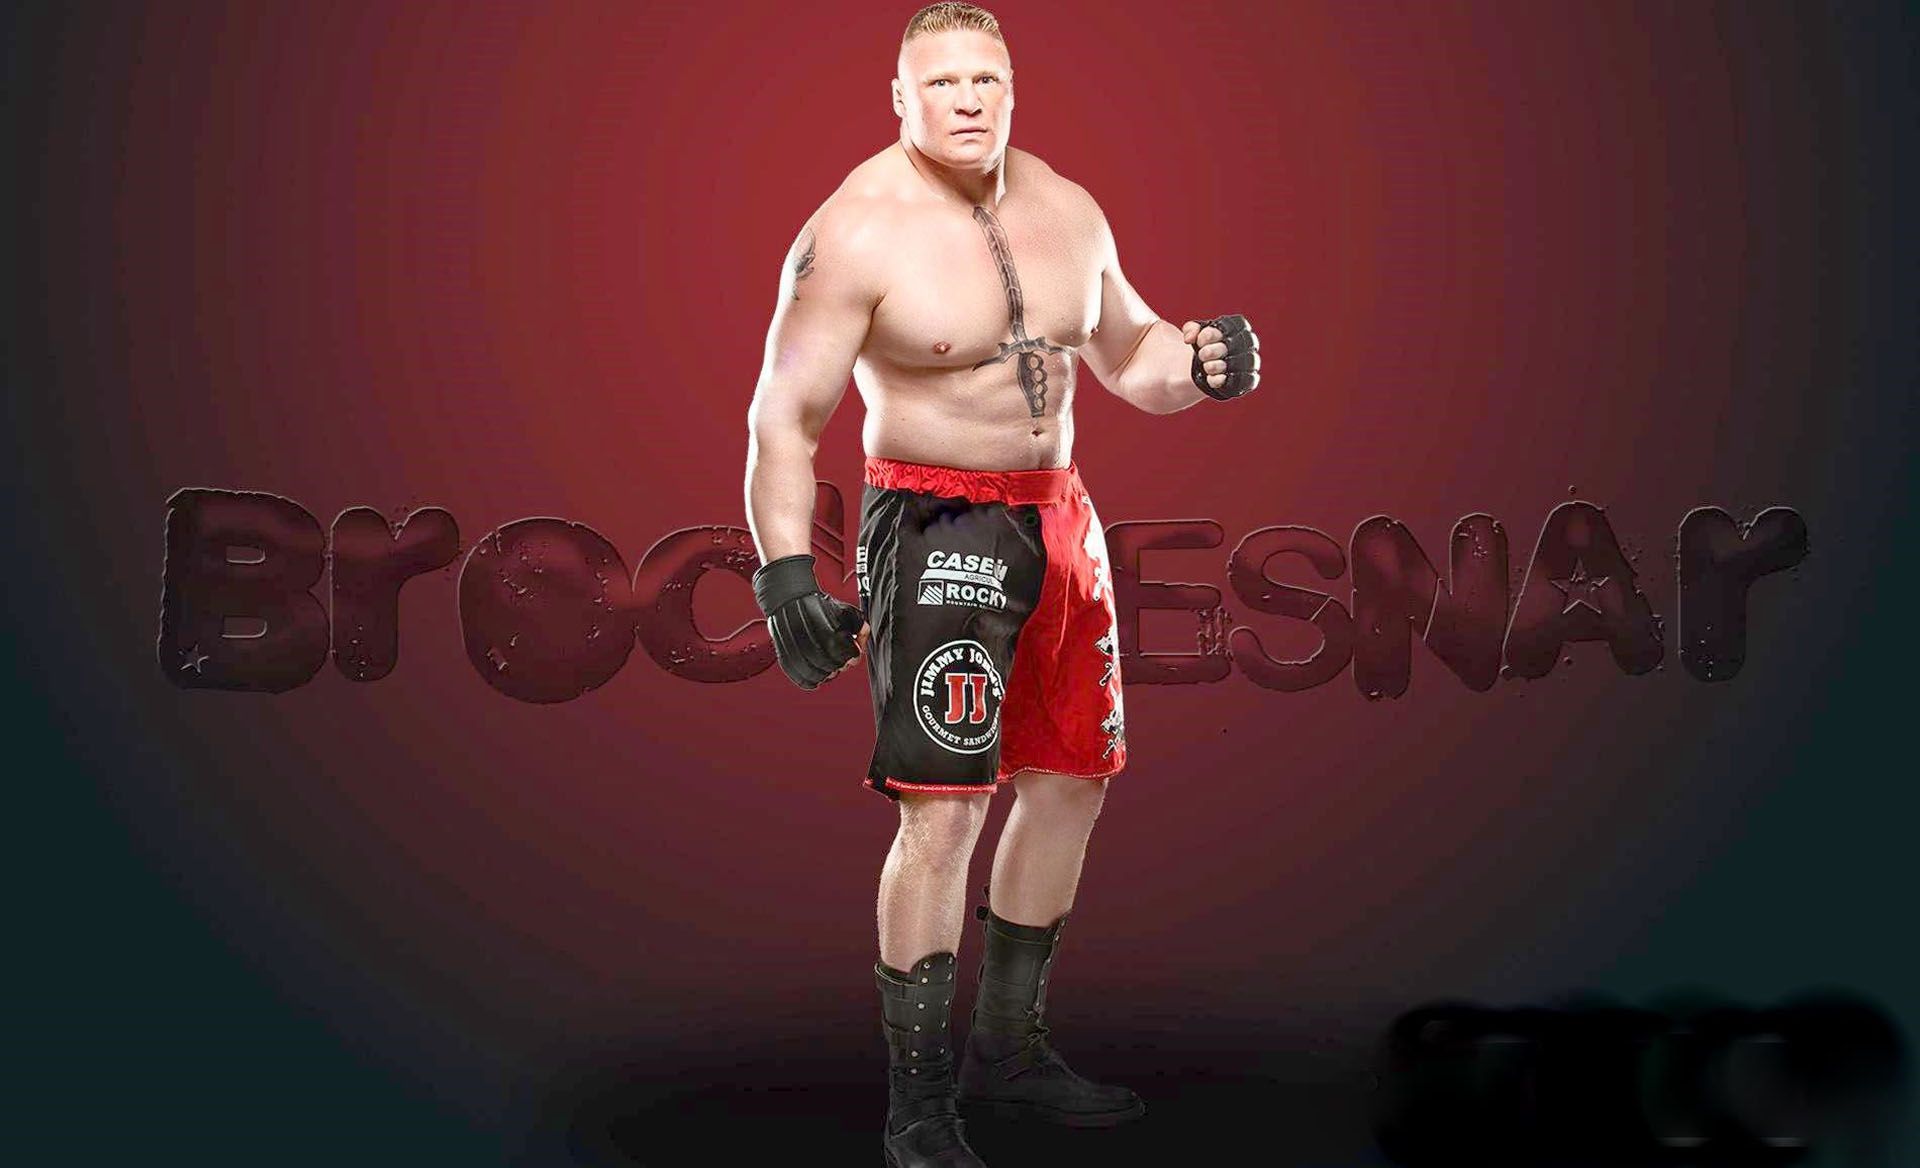 Free download Brock Lesnar HD Wallpaper Daily Background in HD